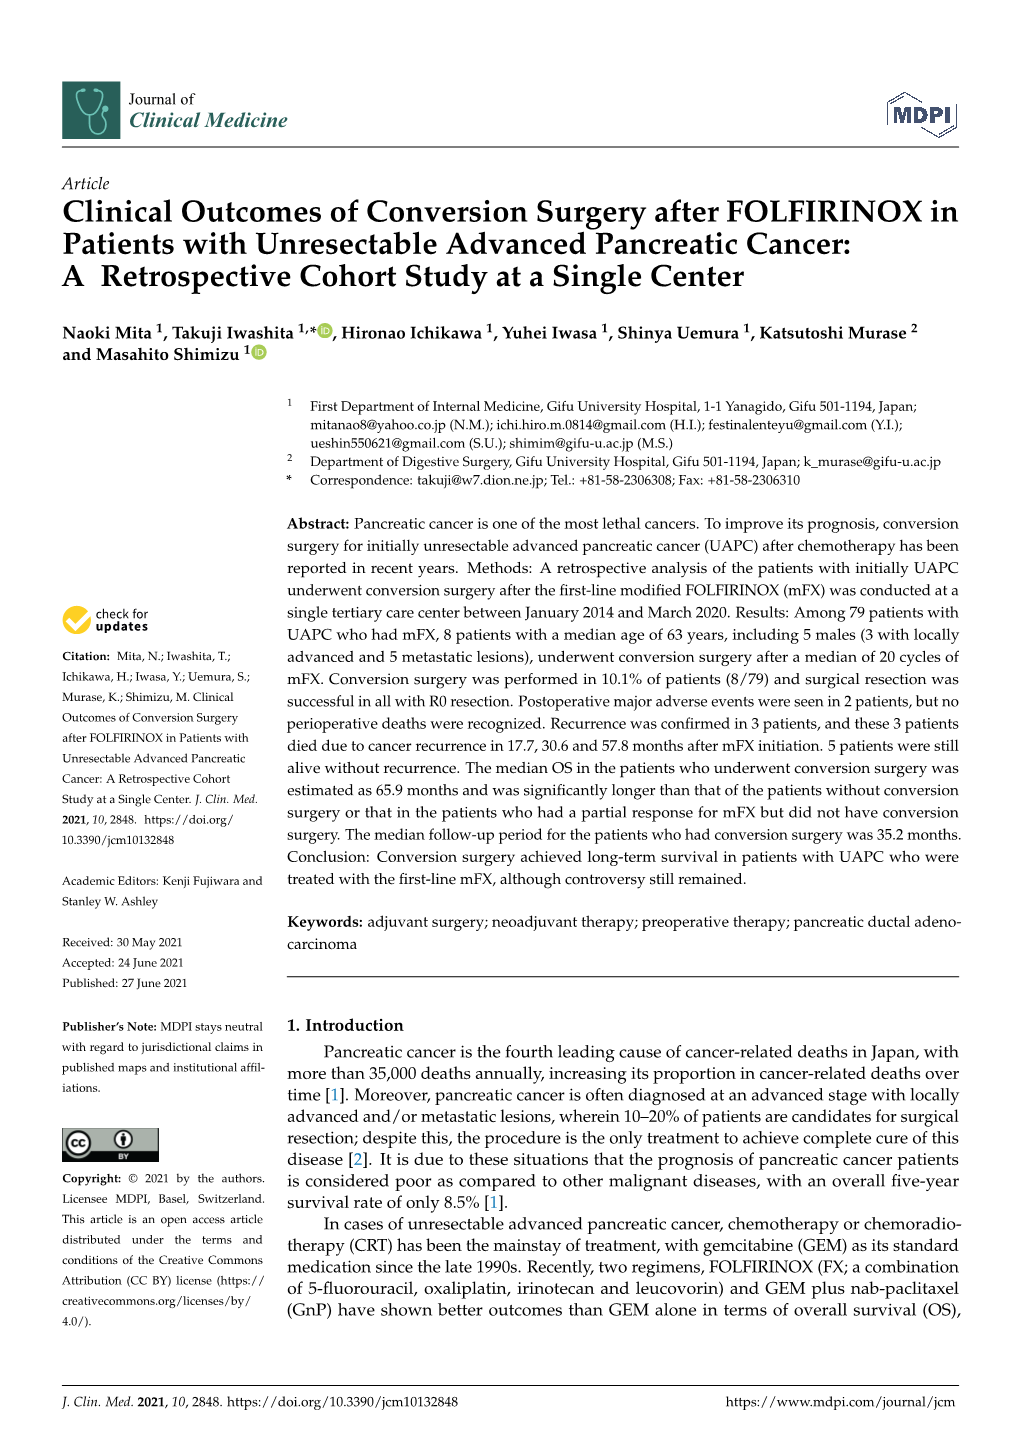 Clinical Outcomes of Conversion Surgery After FOLFIRINOX in Patients with Unresectable Advanced Pancreatic Cancer: a Retrospective Cohort Study at a Single Center